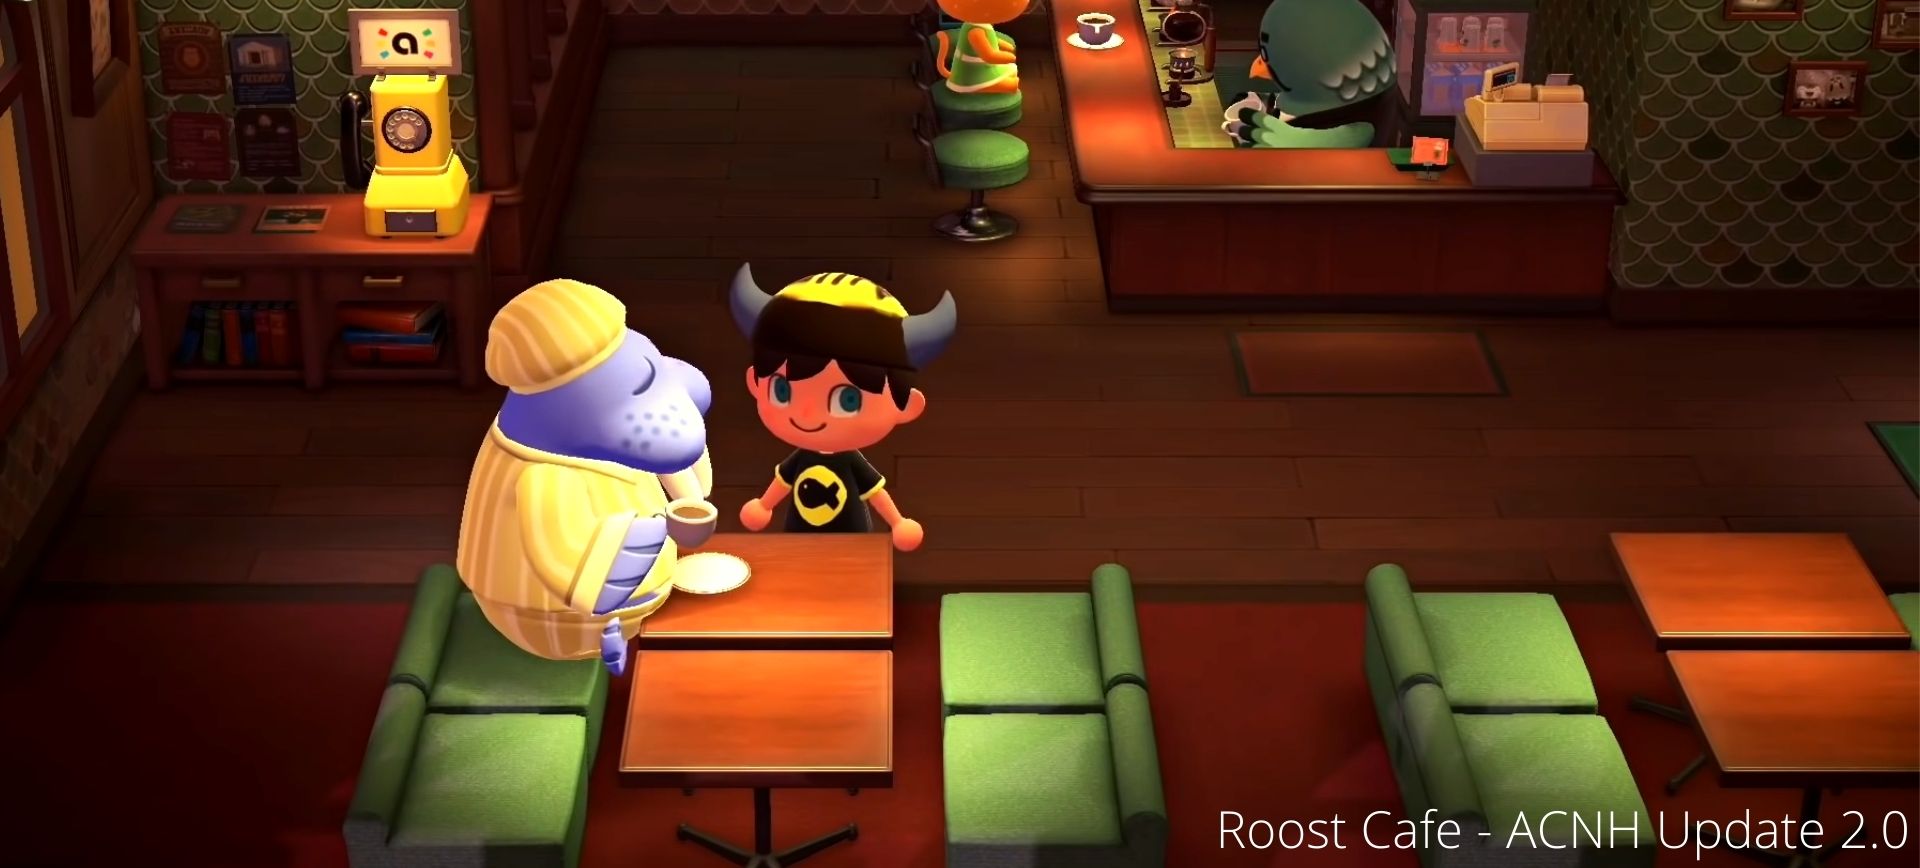 How do you unlock 7 Roost rewards in Animal Crossing: New Horizons?